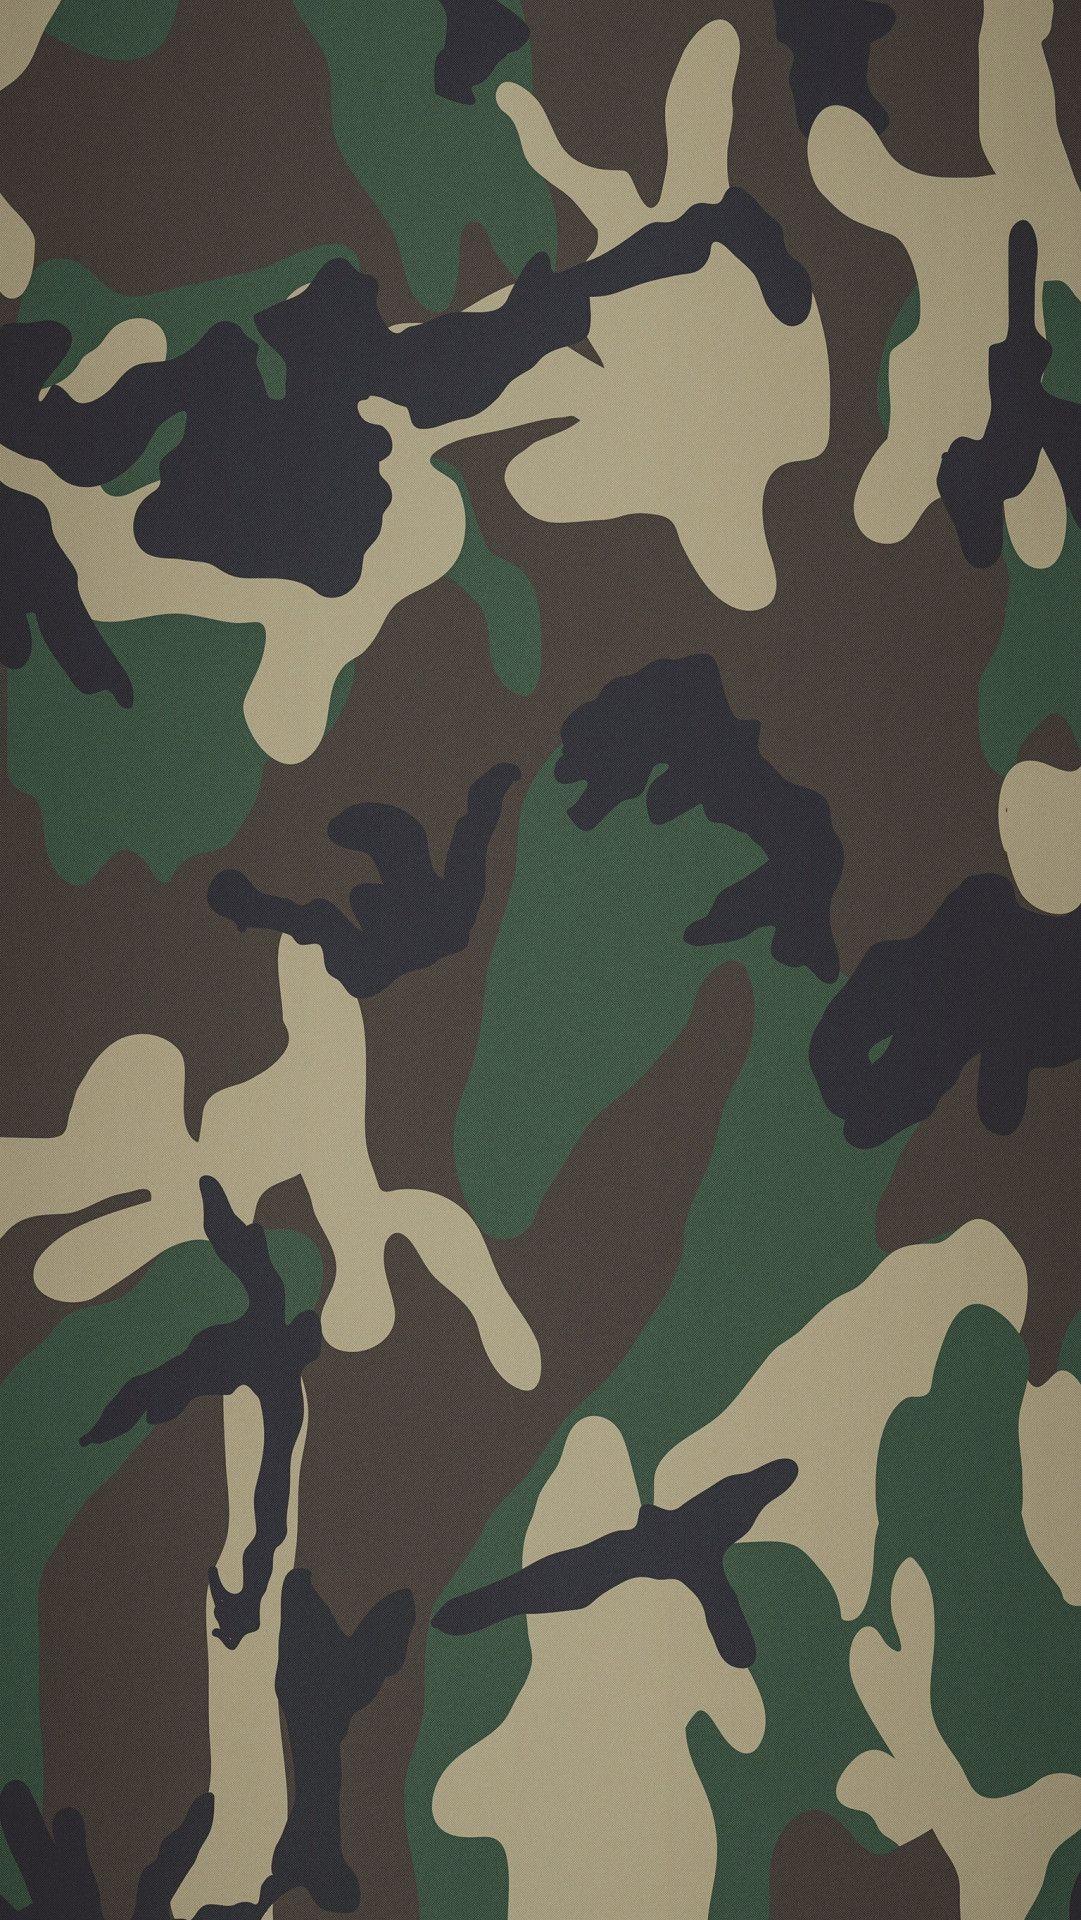 Camo Phone Wallpapers - Top Free Camo Phone Backgrounds - WallpaperAccess